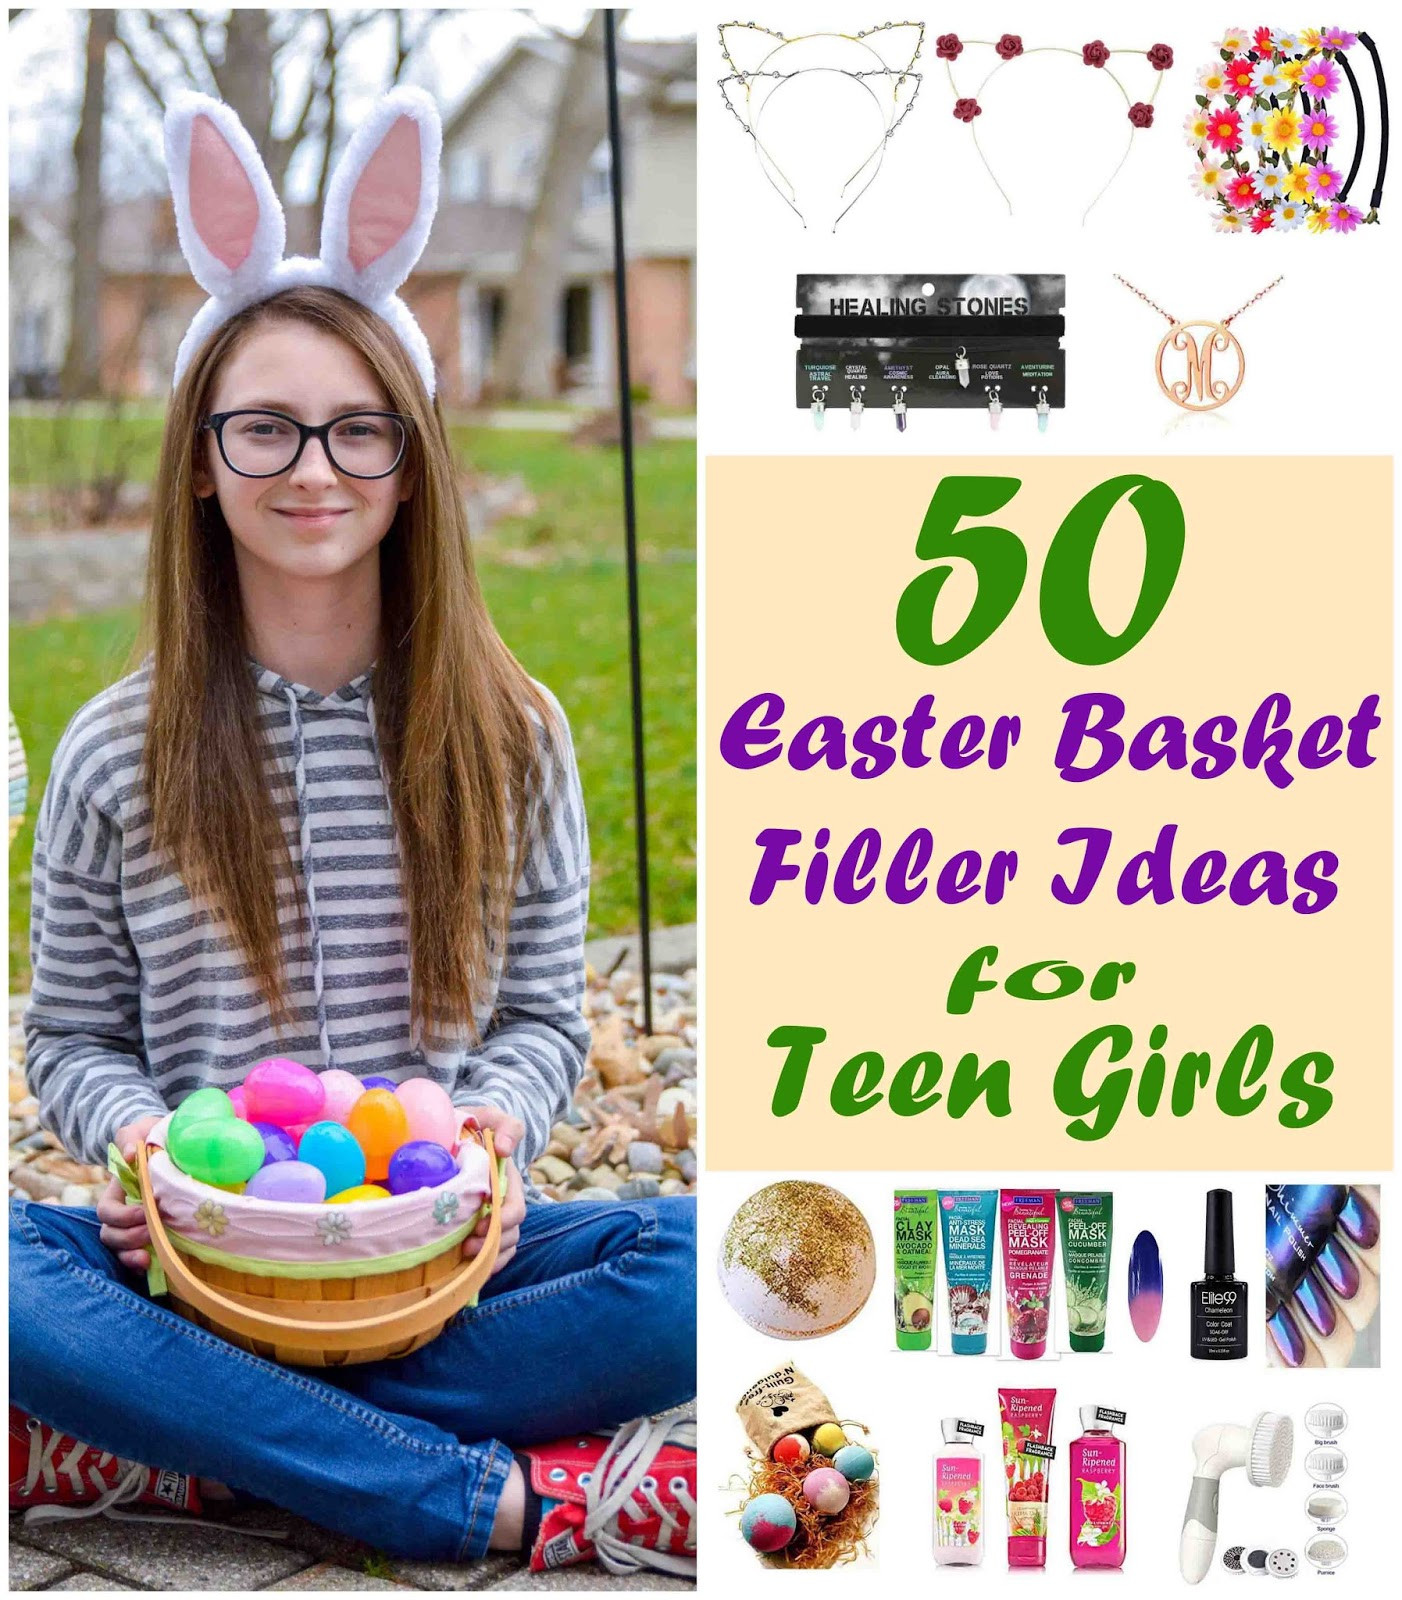 Easter Gift Ideas For Teenage Girl
 Theresa s Mixed Nuts Allison s Top 50 Easter Basket